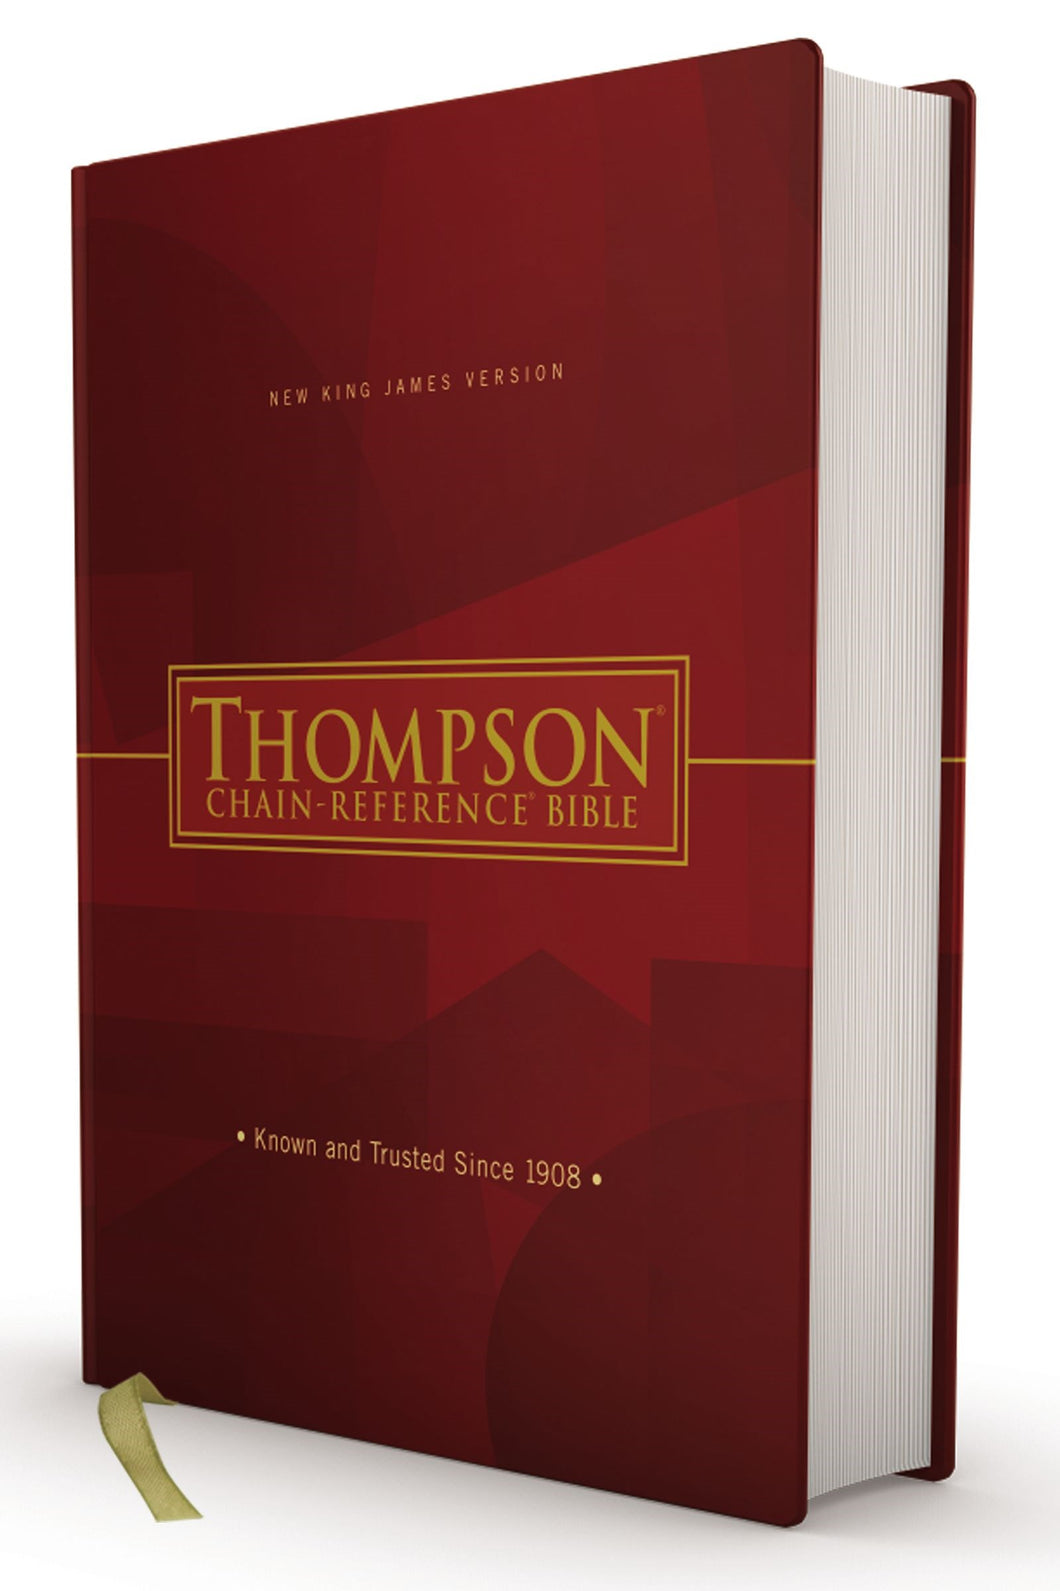 NKJV Thompson Chain-Reference Bible-Hardcover